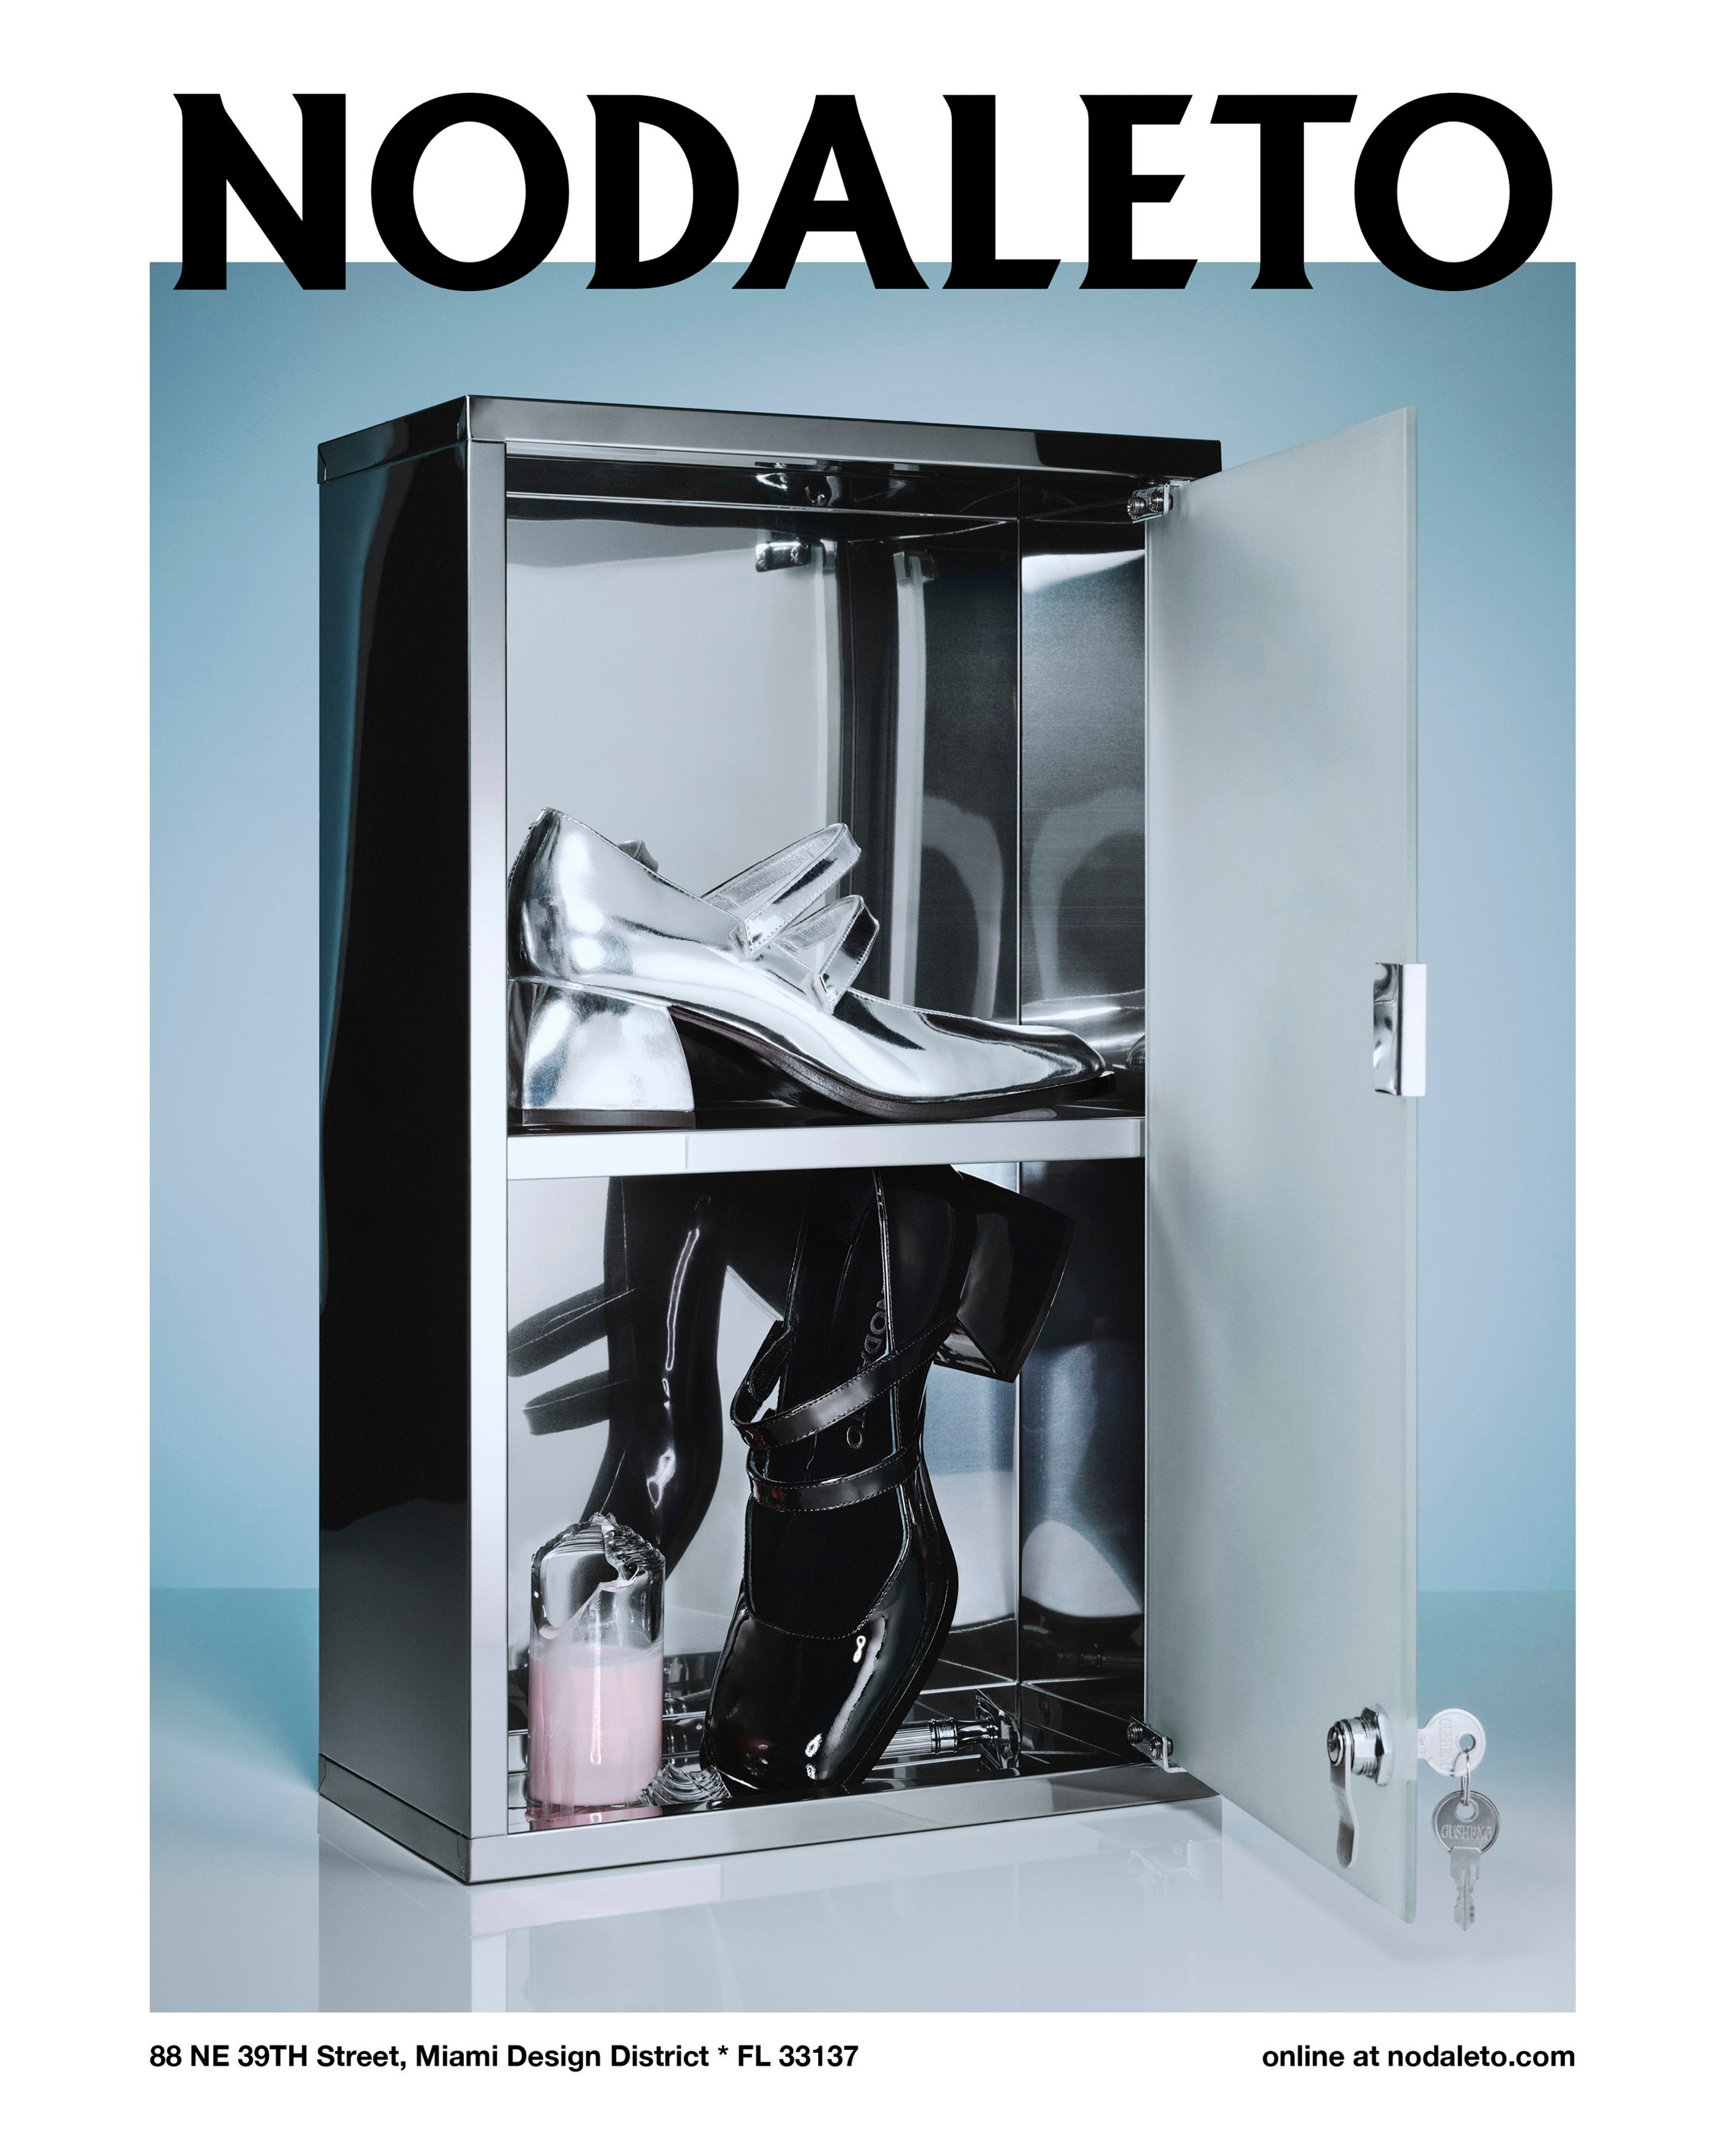 Nodaleto, 2023 Campaign - Romain Roucoules